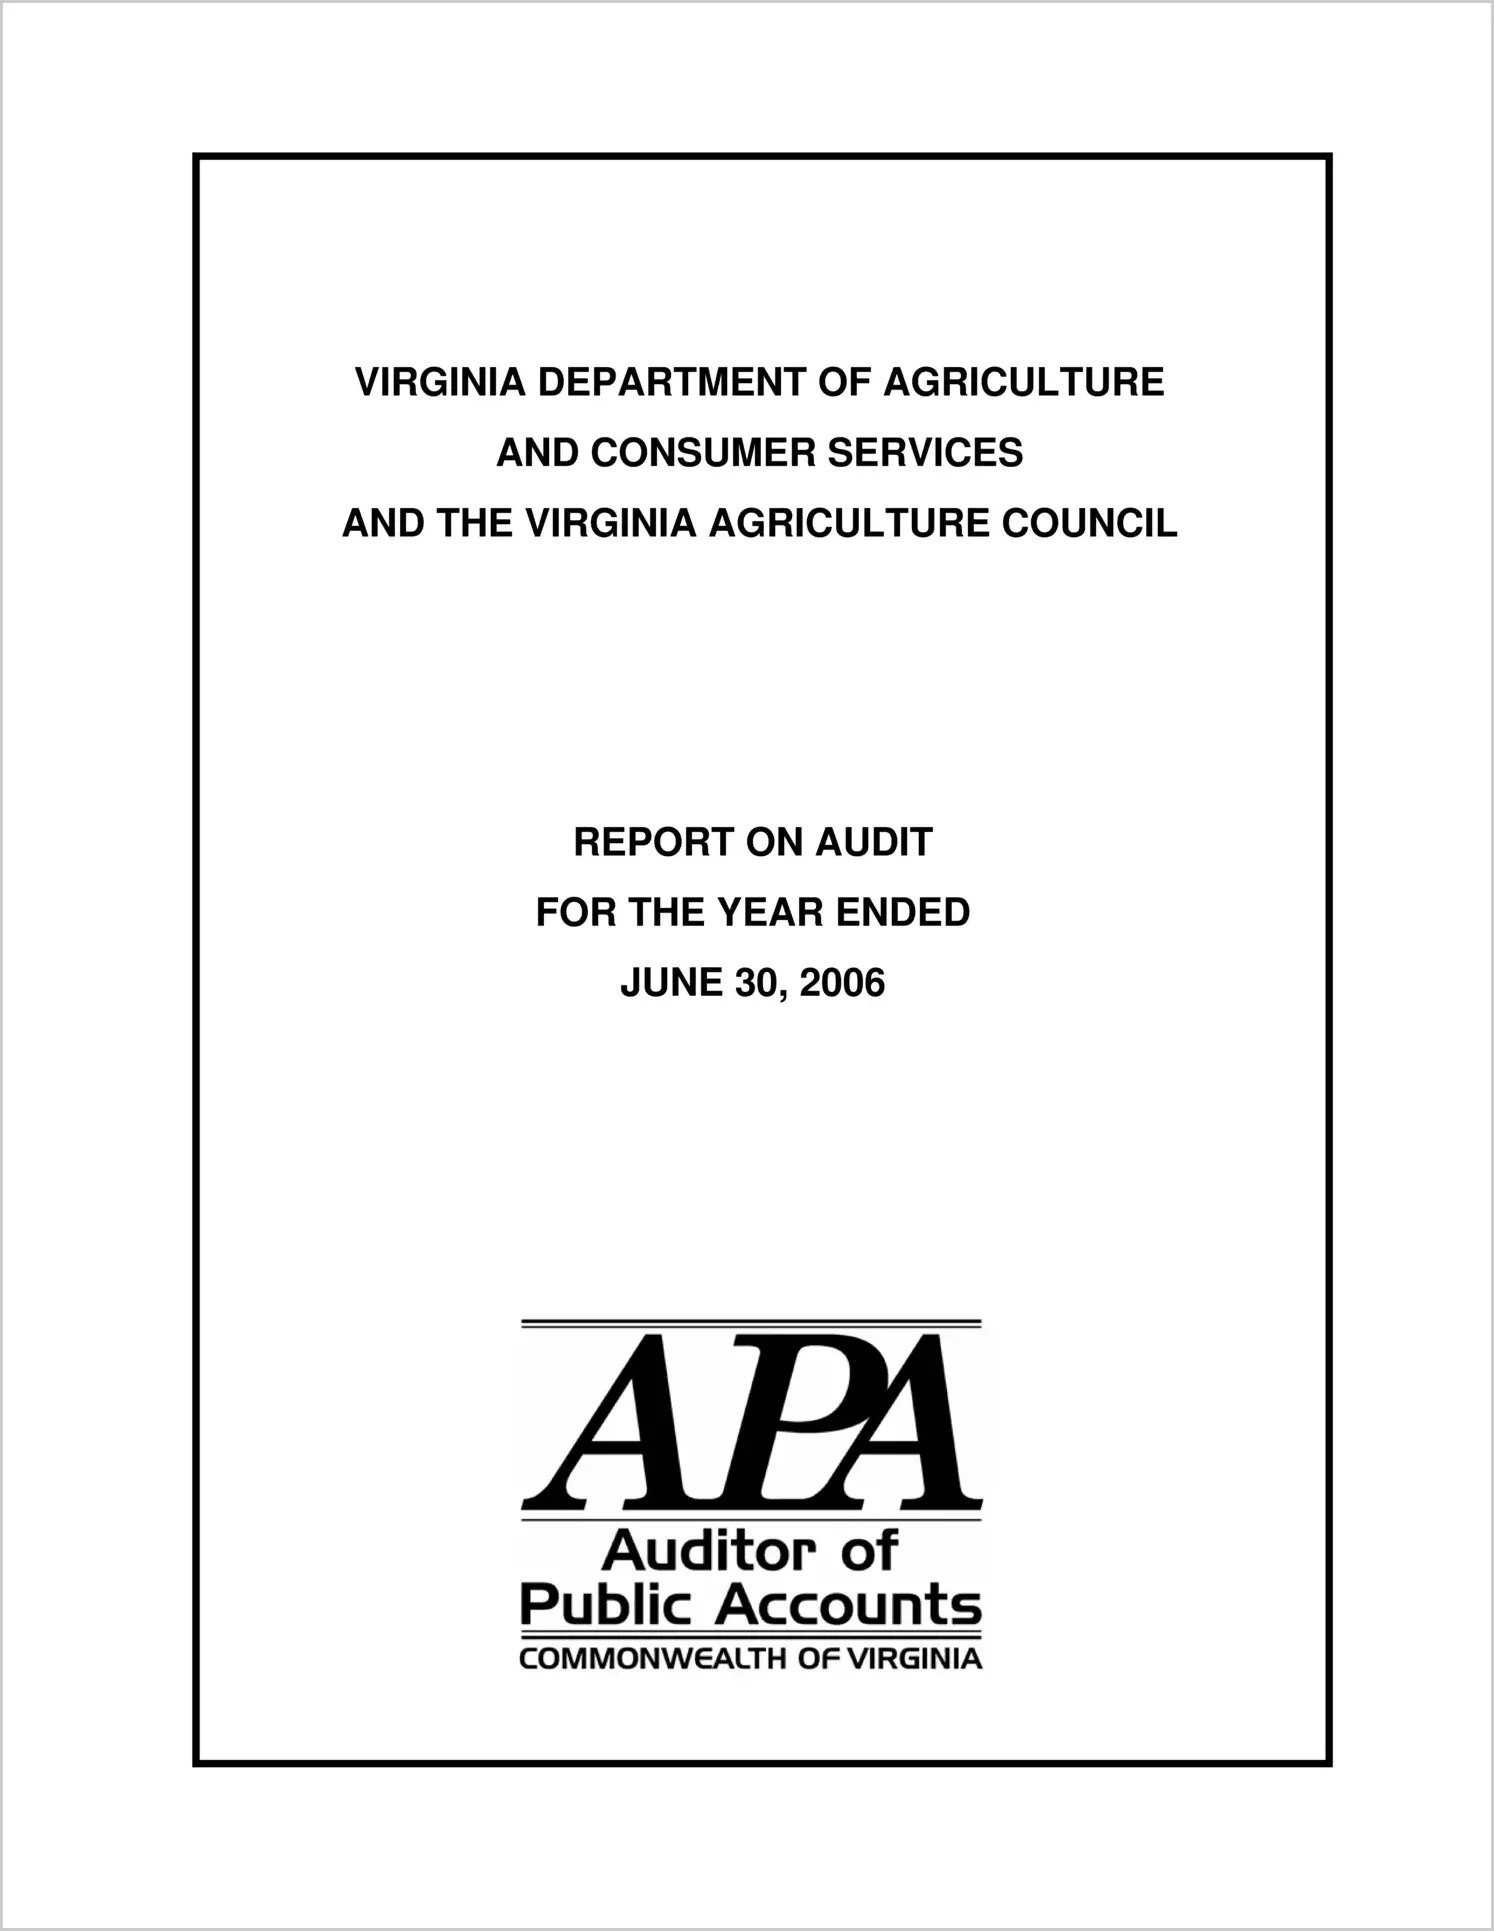 Virginia Department of Agriculture and Consumer Services  and the Virginia Agricultural Council for the year ended June 30, 2006